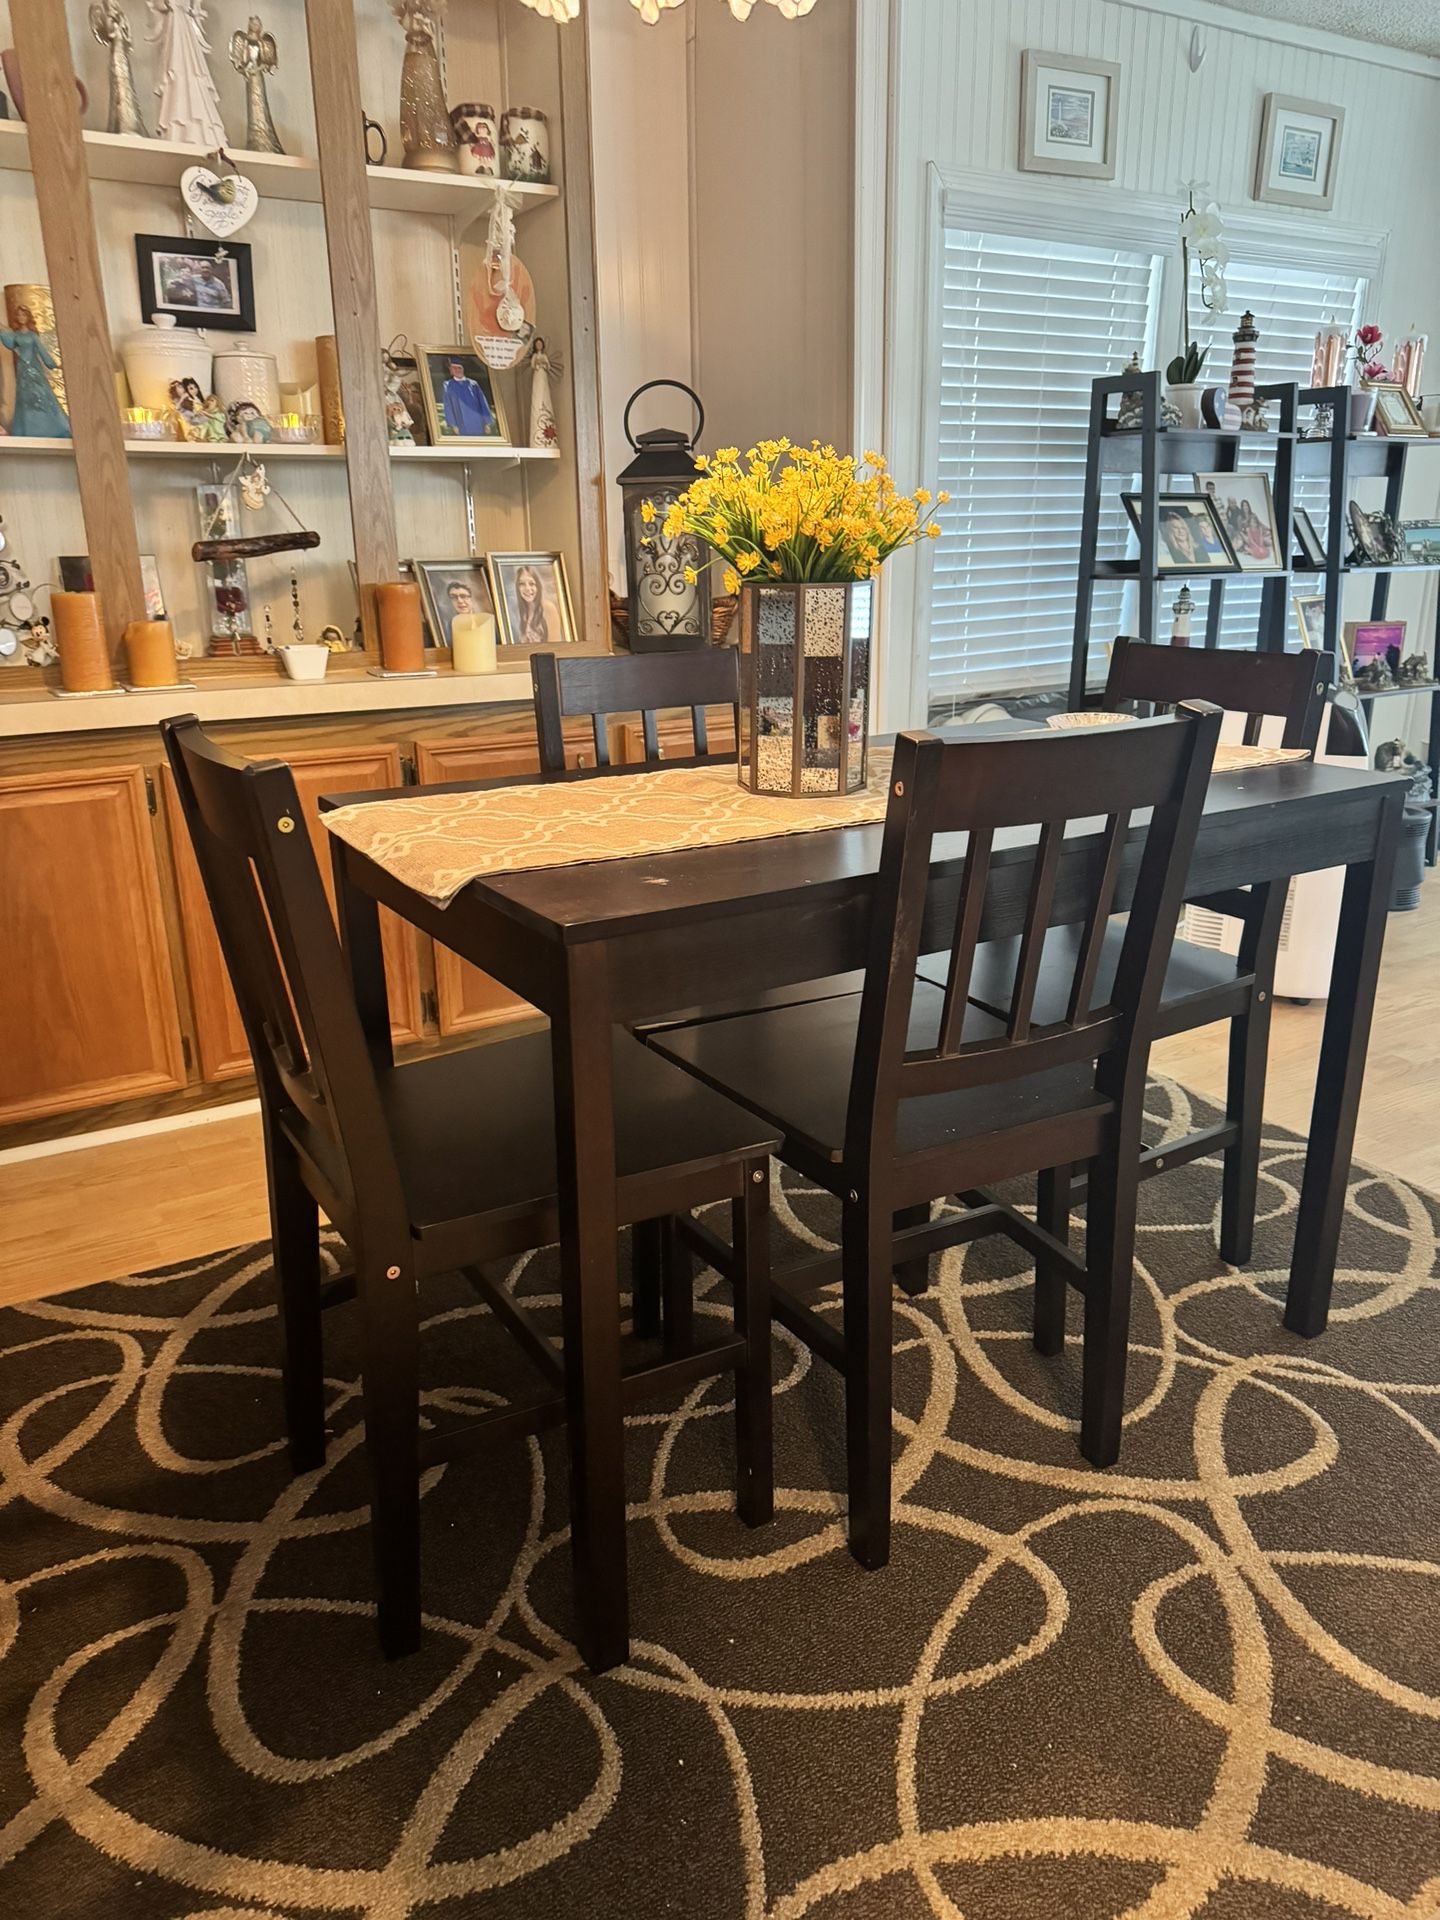 Would dinette table and chairs